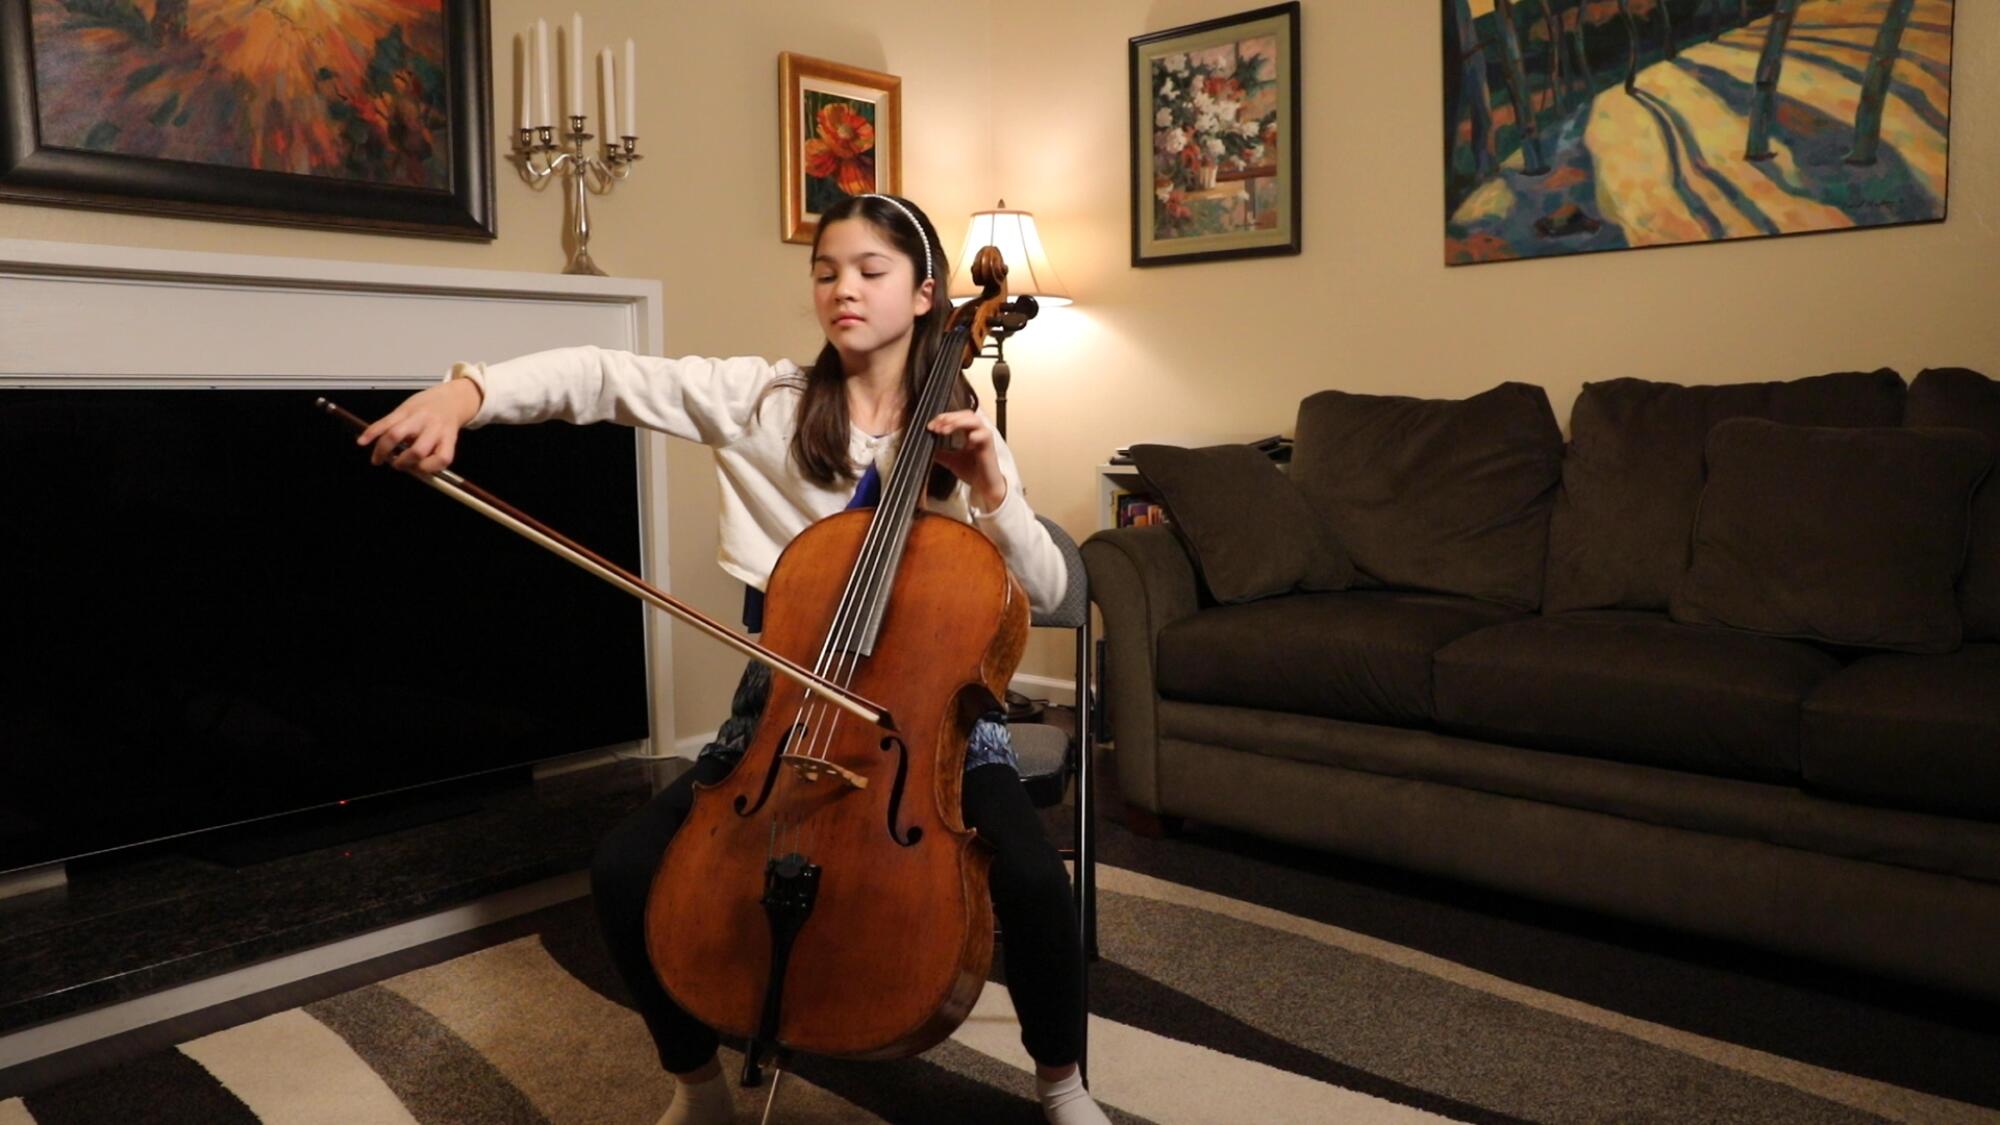 Starla Breshears plays music in her Northern California home.